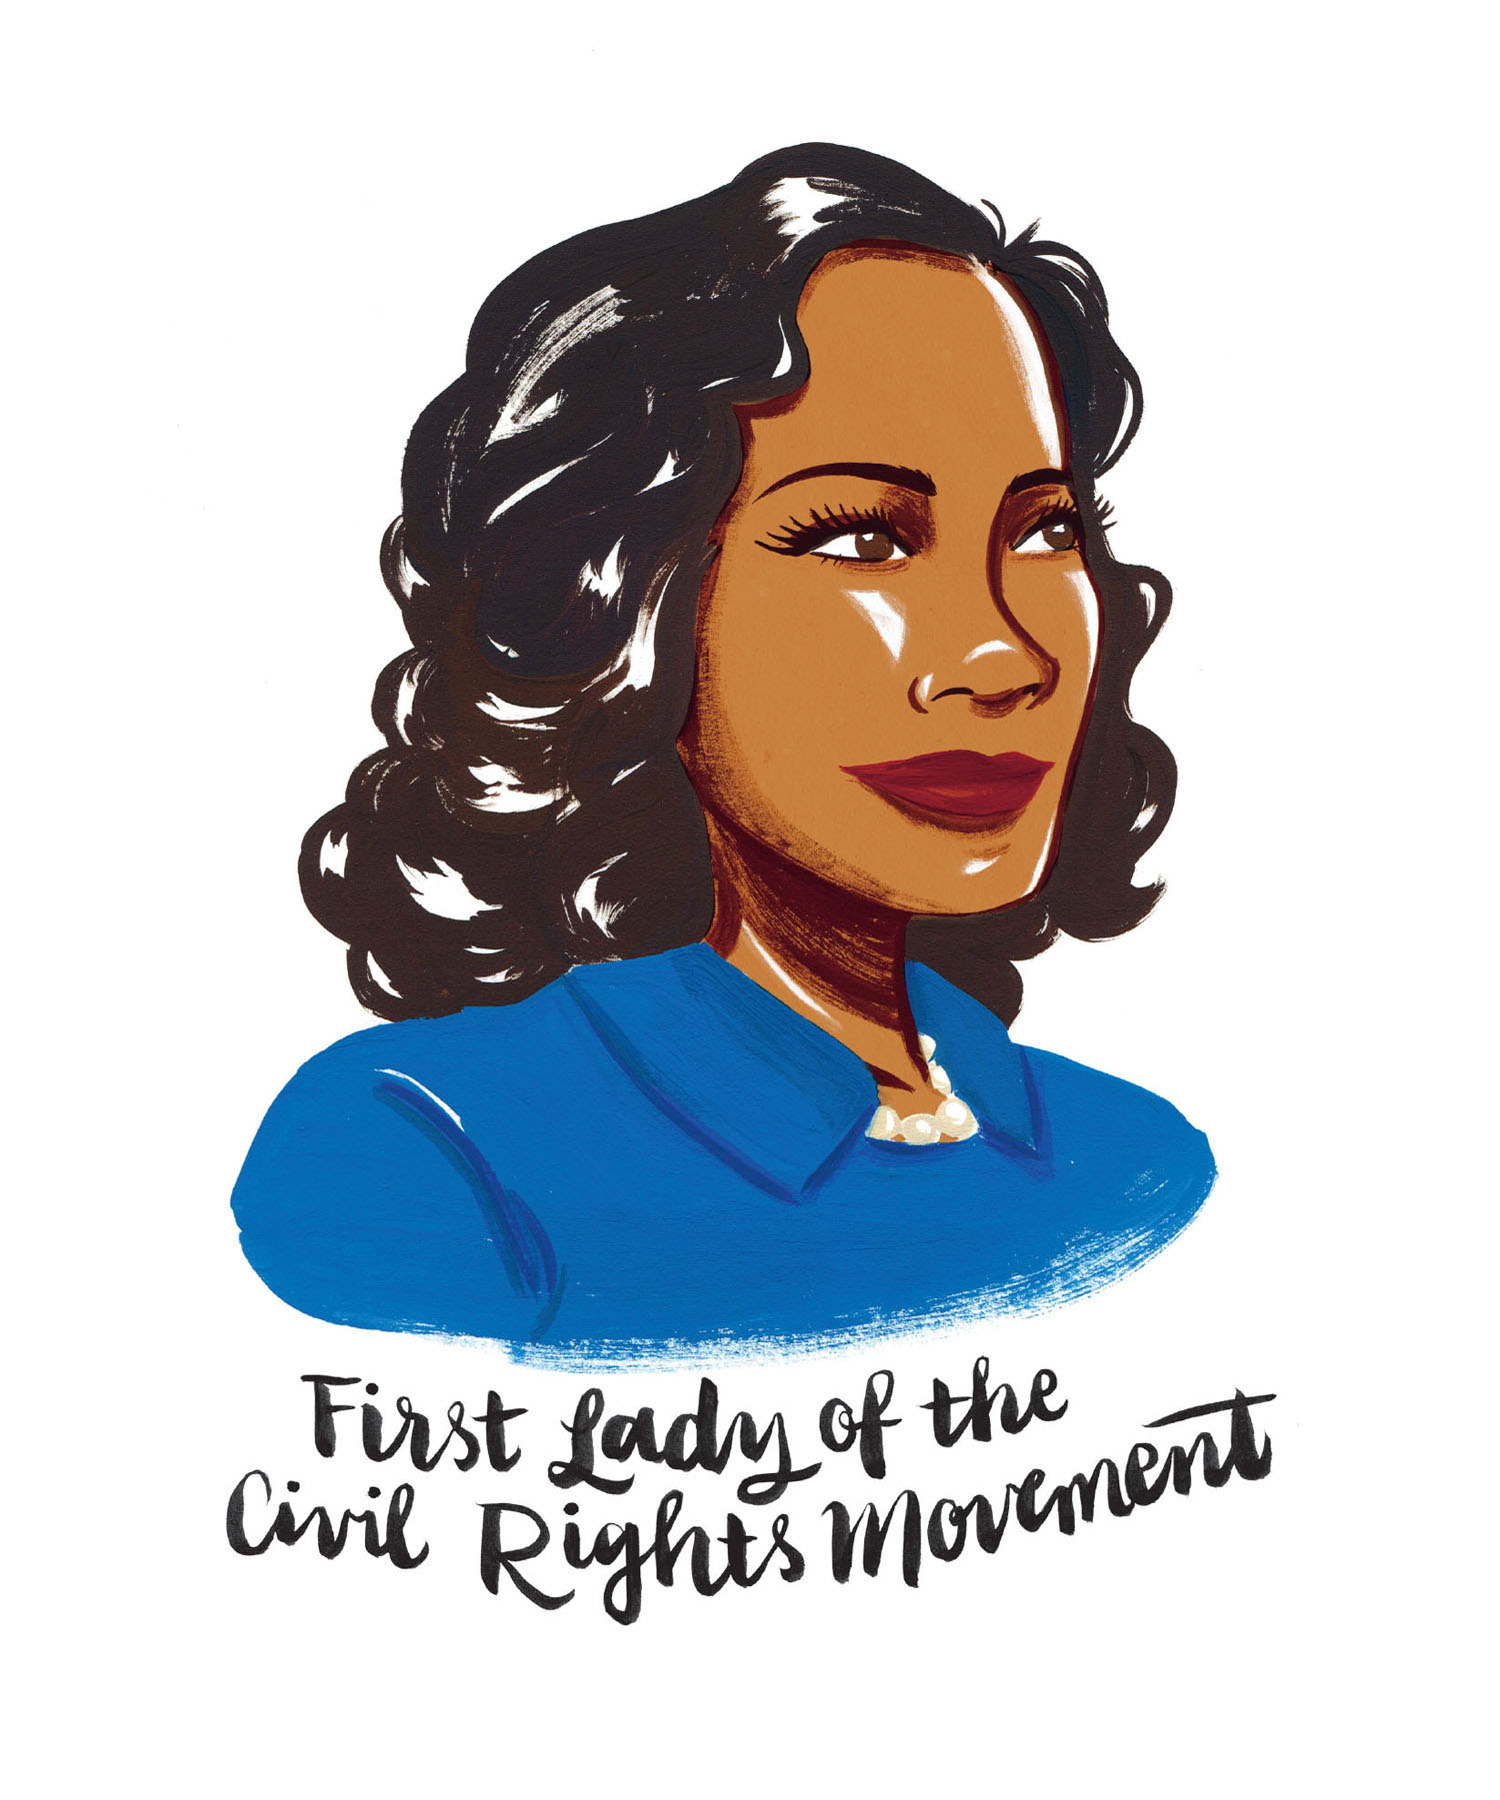 First Lady of the Civil Rights Movement